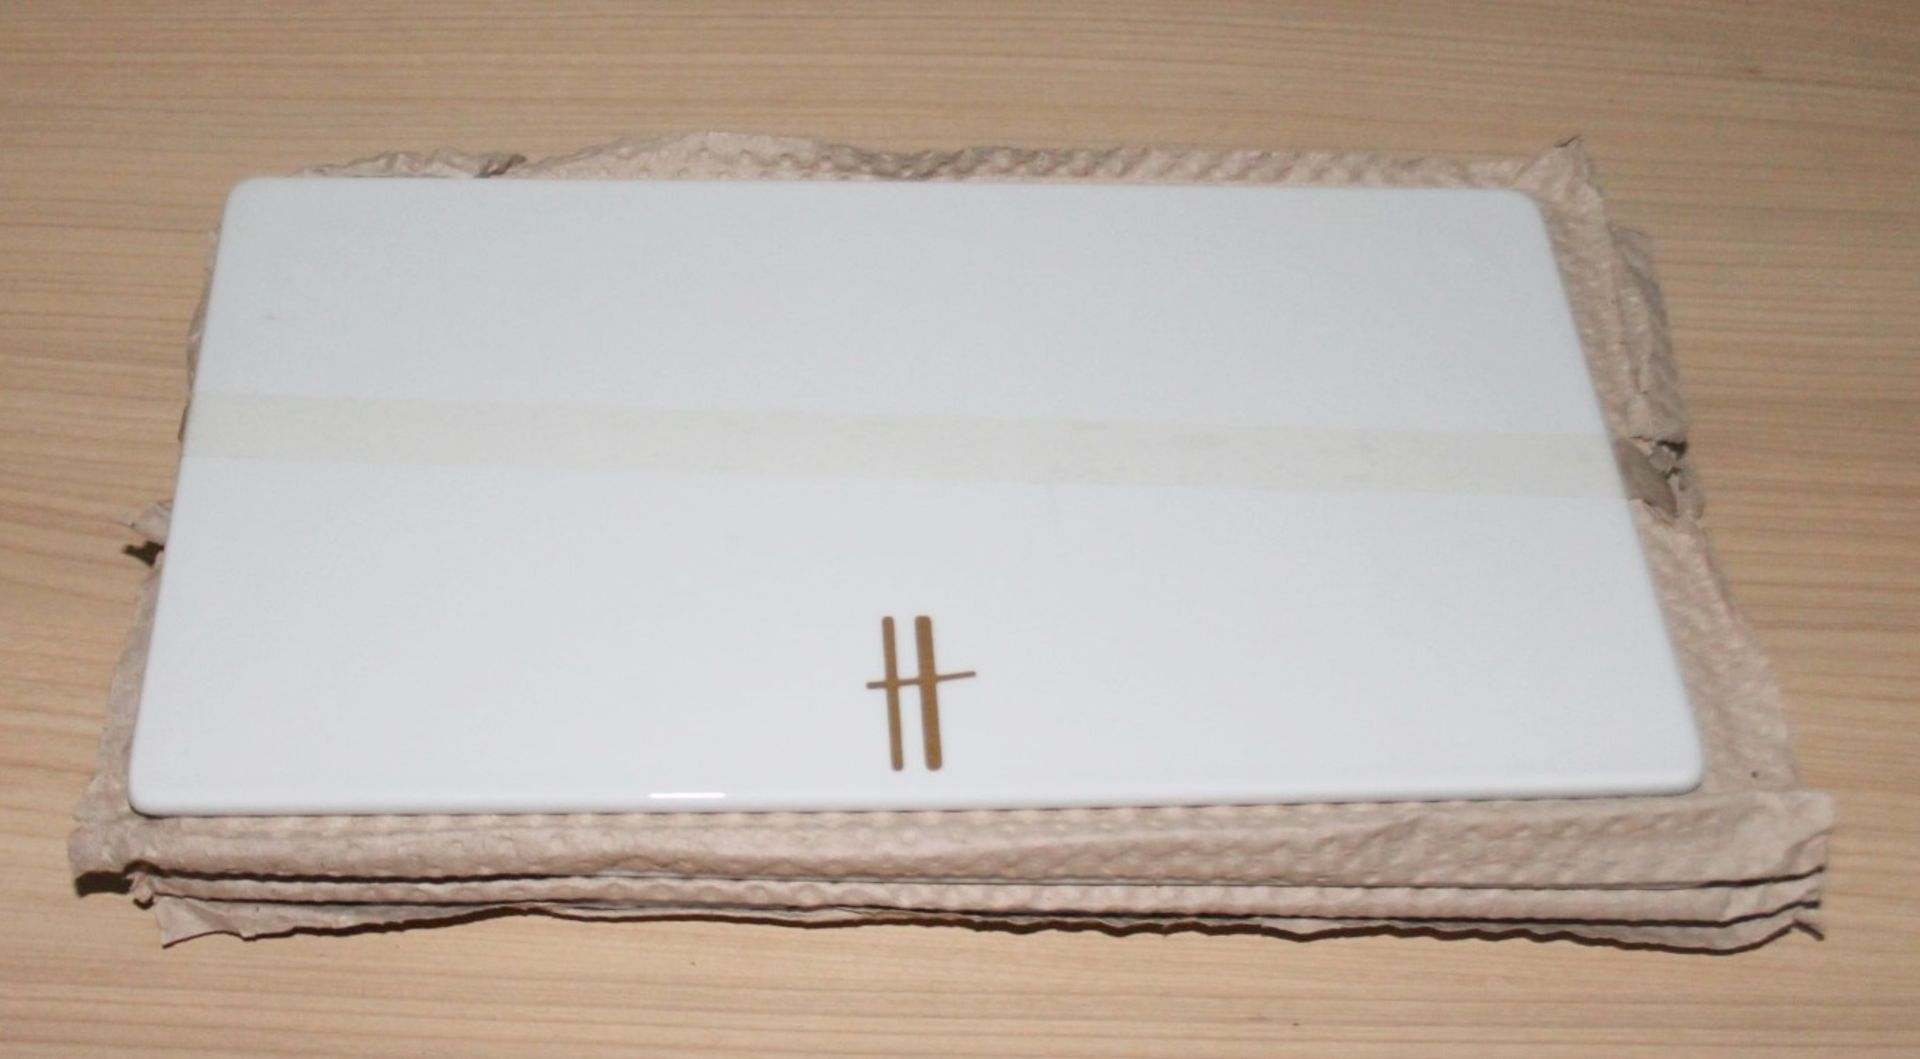 12 x PILLIVUYT Porcelain Rectangular Serving Trays In White Featuring 'Famous Branding' In Gold - - Image 5 of 7